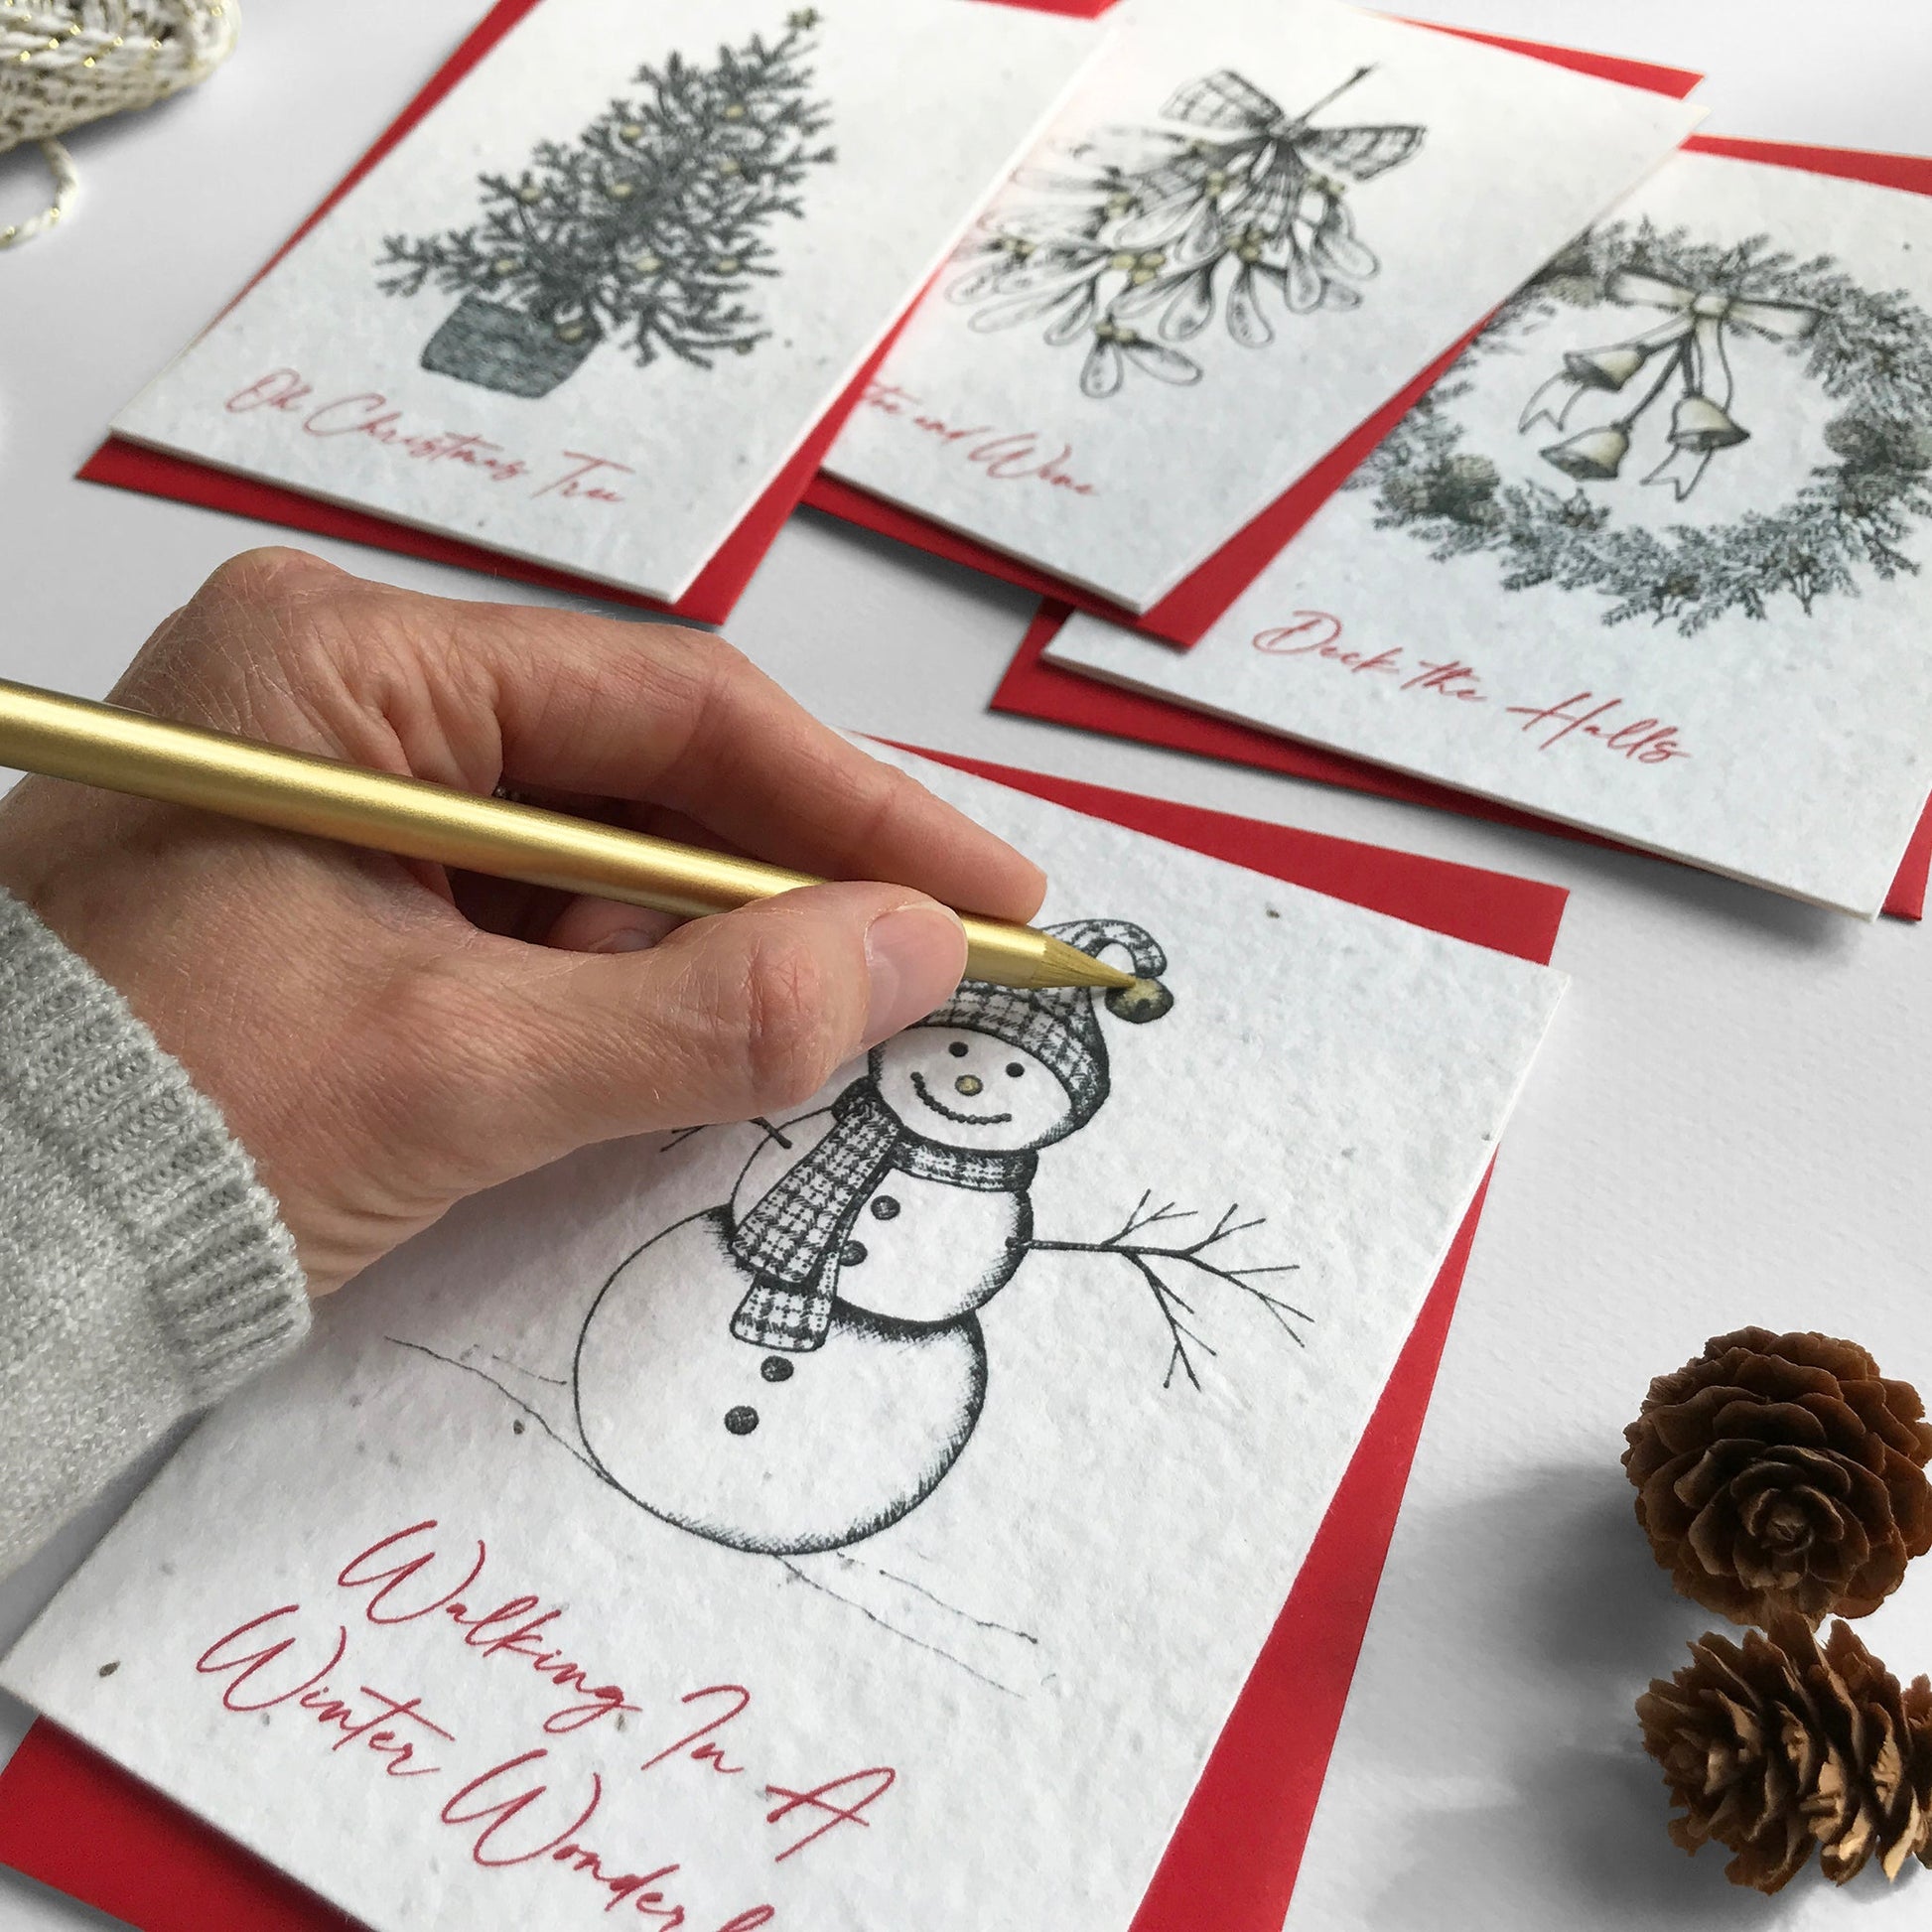 Image shows a pack of A6 plantable Festive Illustration Christmas cards being hand finished with gold pencil. There are 4 card designs in the pack, each with a recycled red envelope. The hand illustrated cards are printed onto plantable seed paper so when the festivities are over, they can be planted to grow bee friendly flowers for the garden.